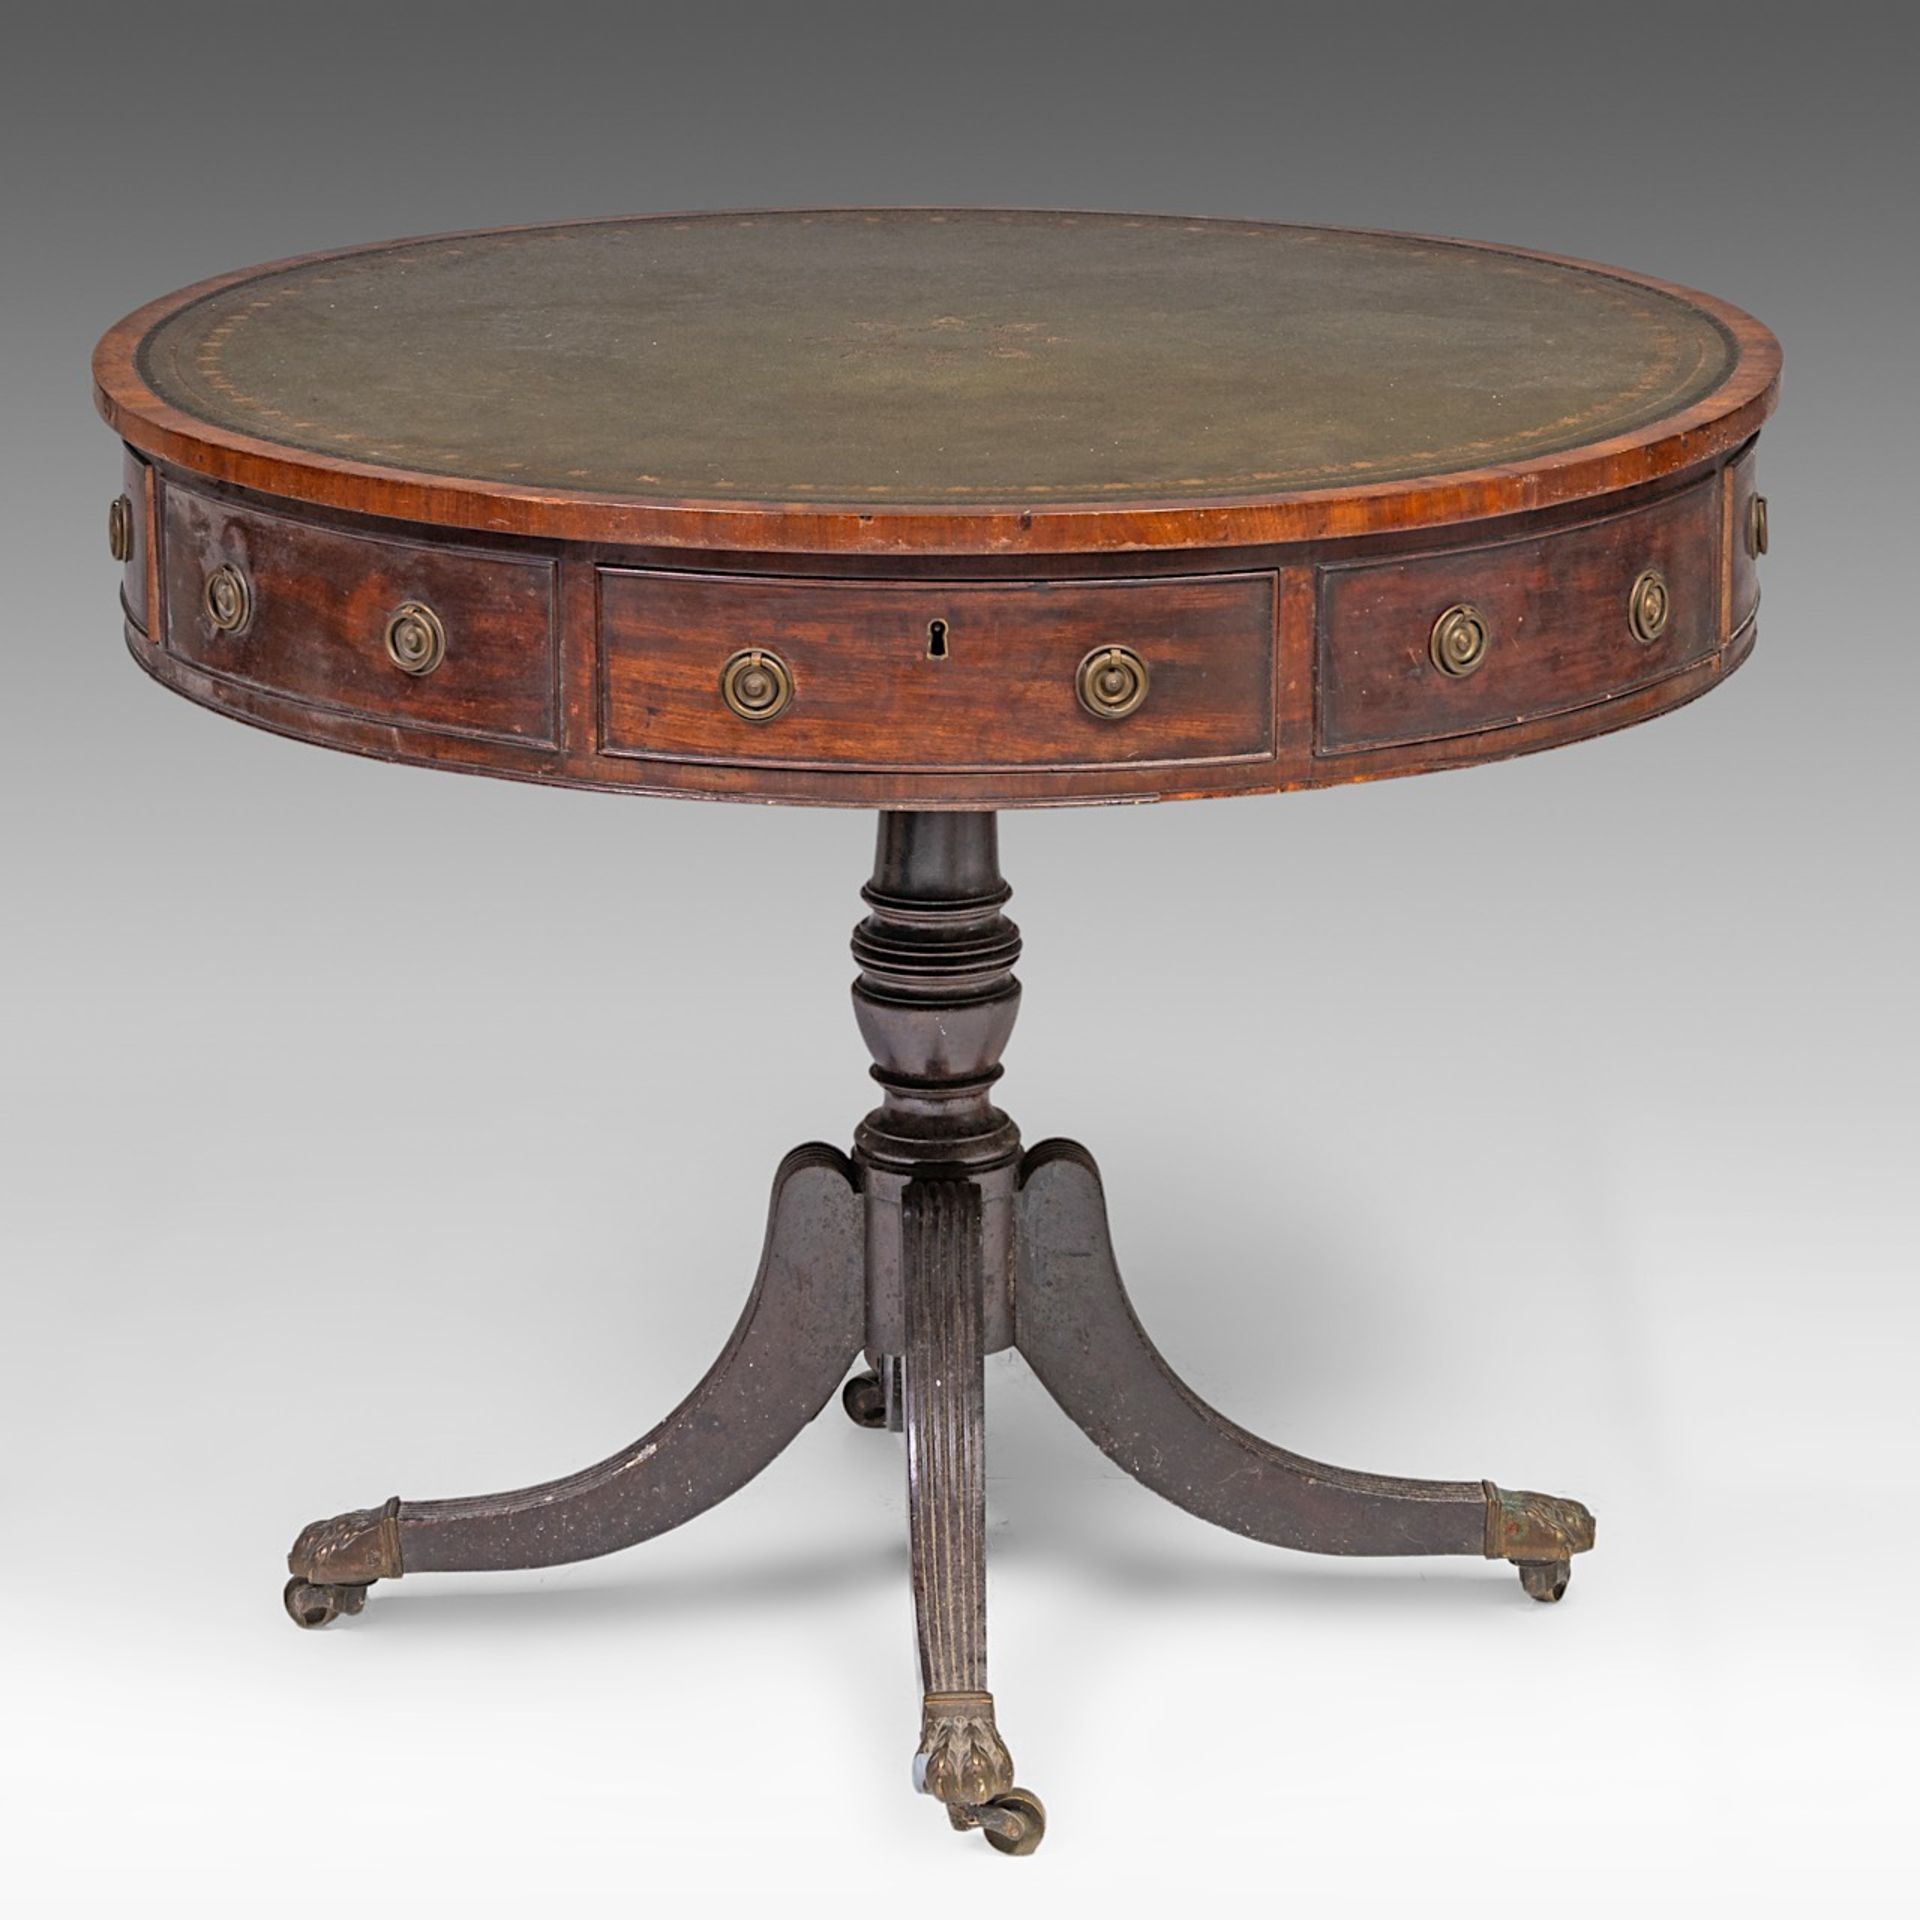 An English revolving drum table, marked with a crowned WR, ca. 1800, H 74 cm - dia 91 cm - Image 4 of 9